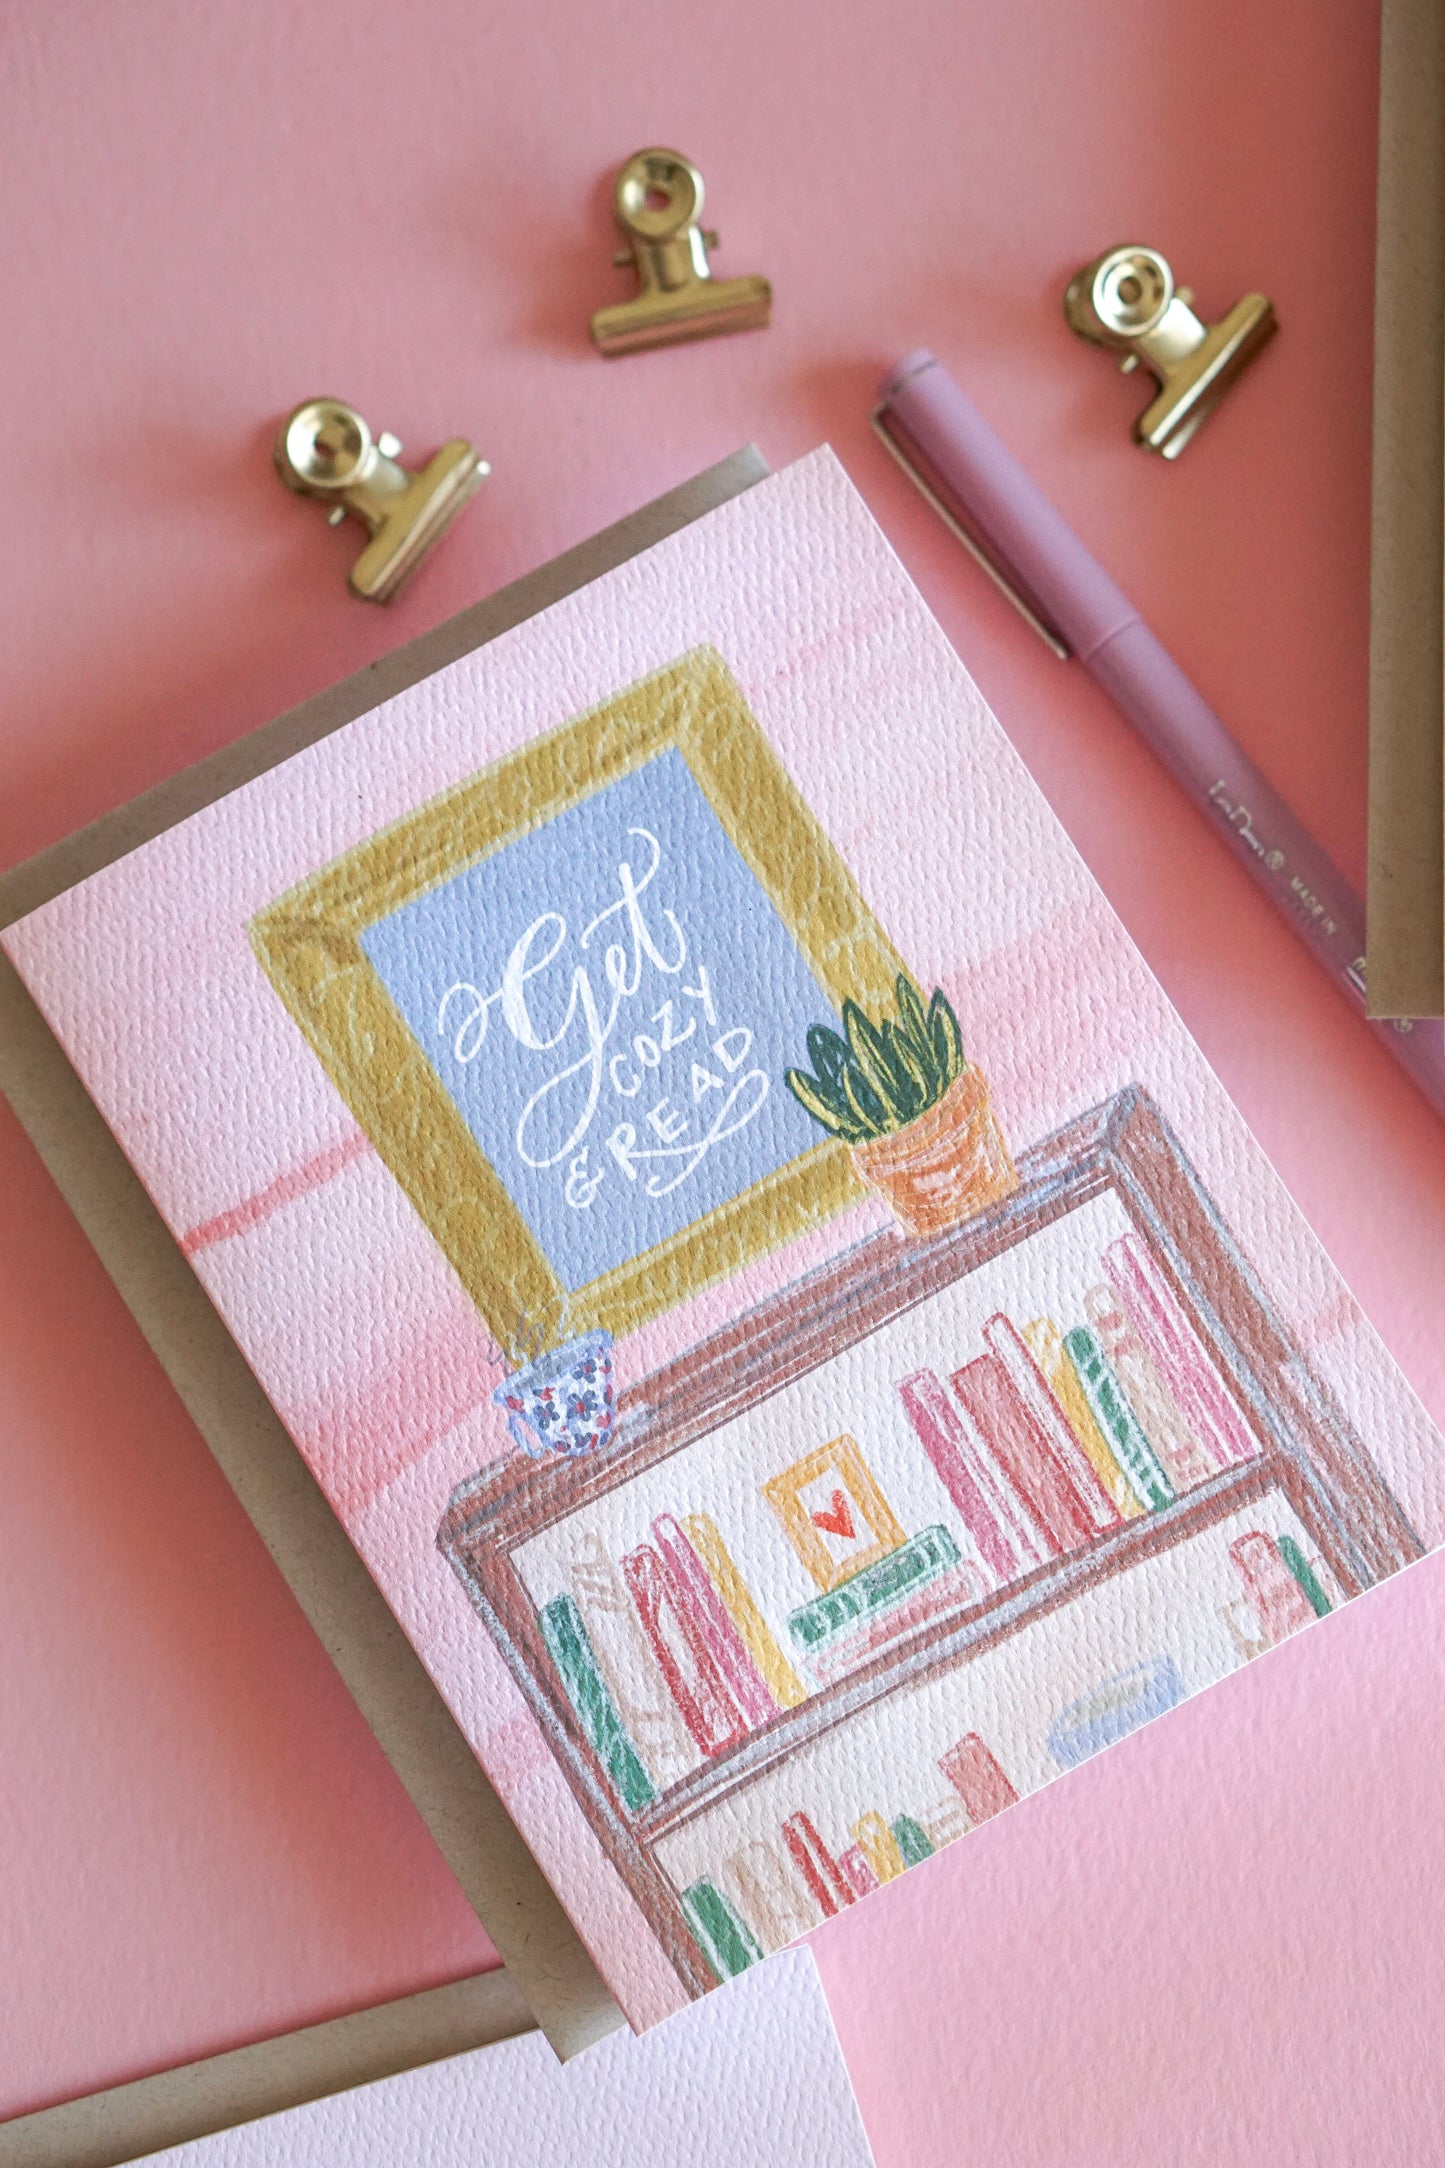 Get Cozy and Read Card